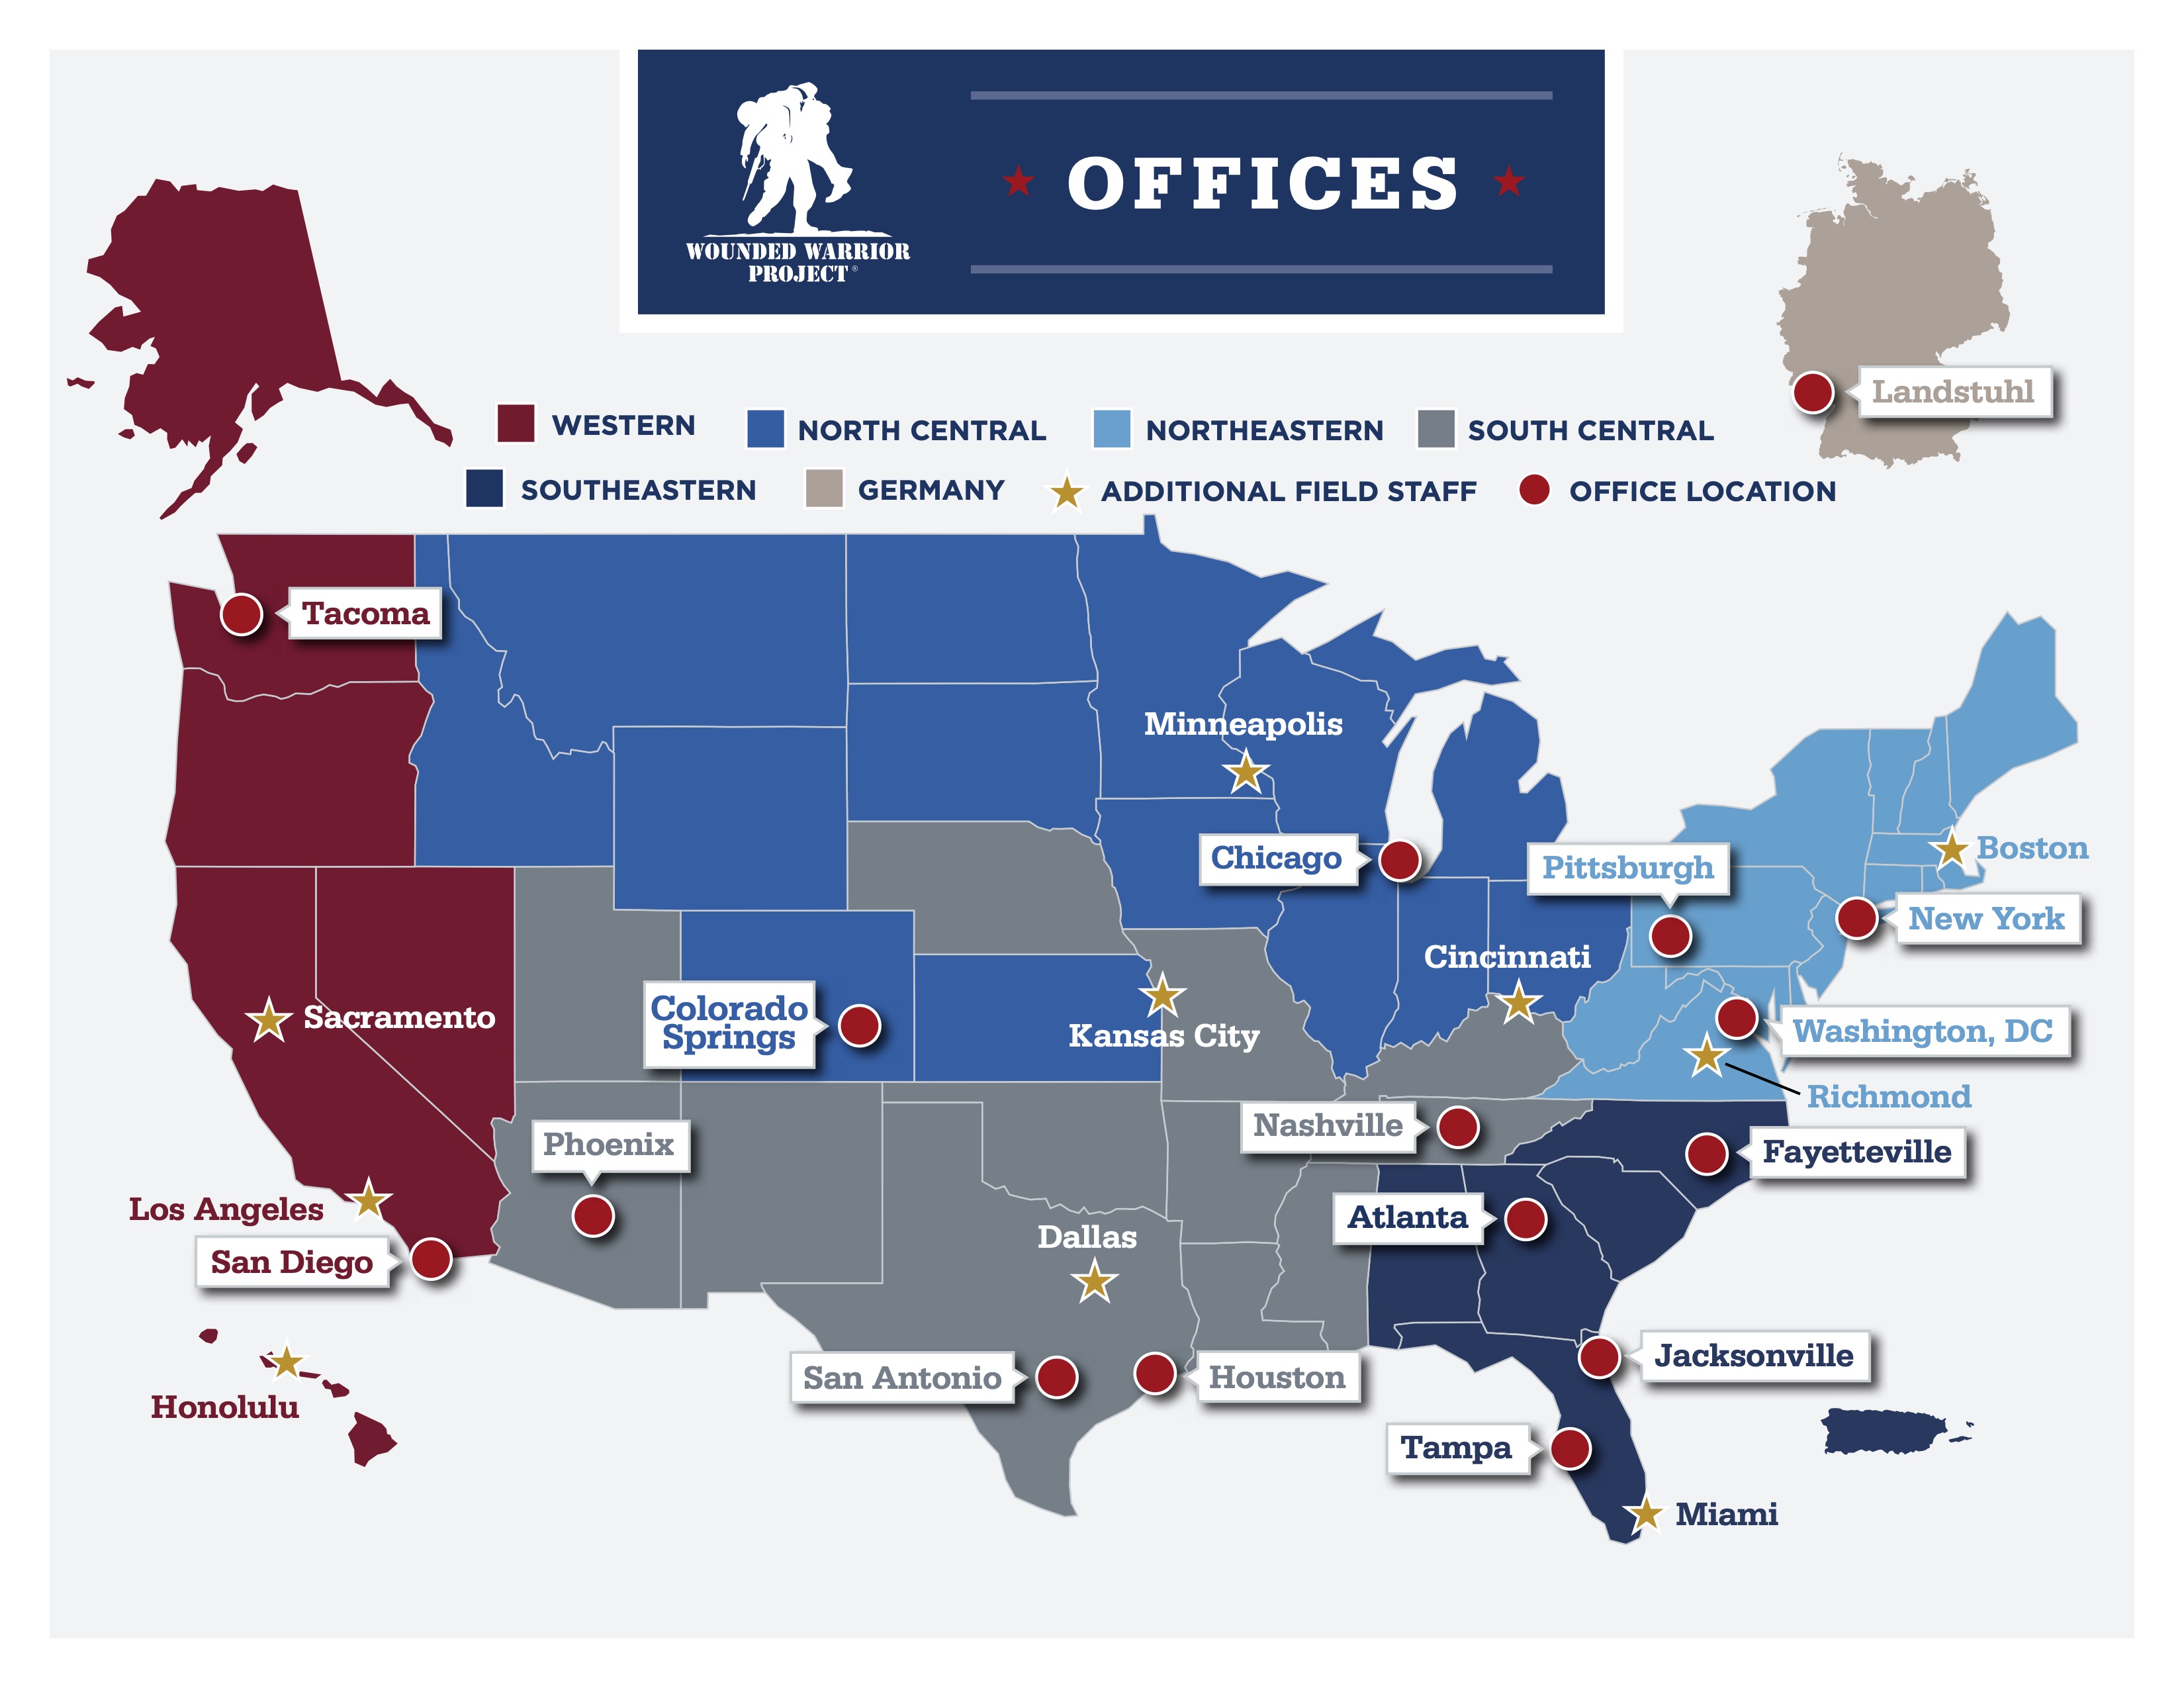 WWP offices map